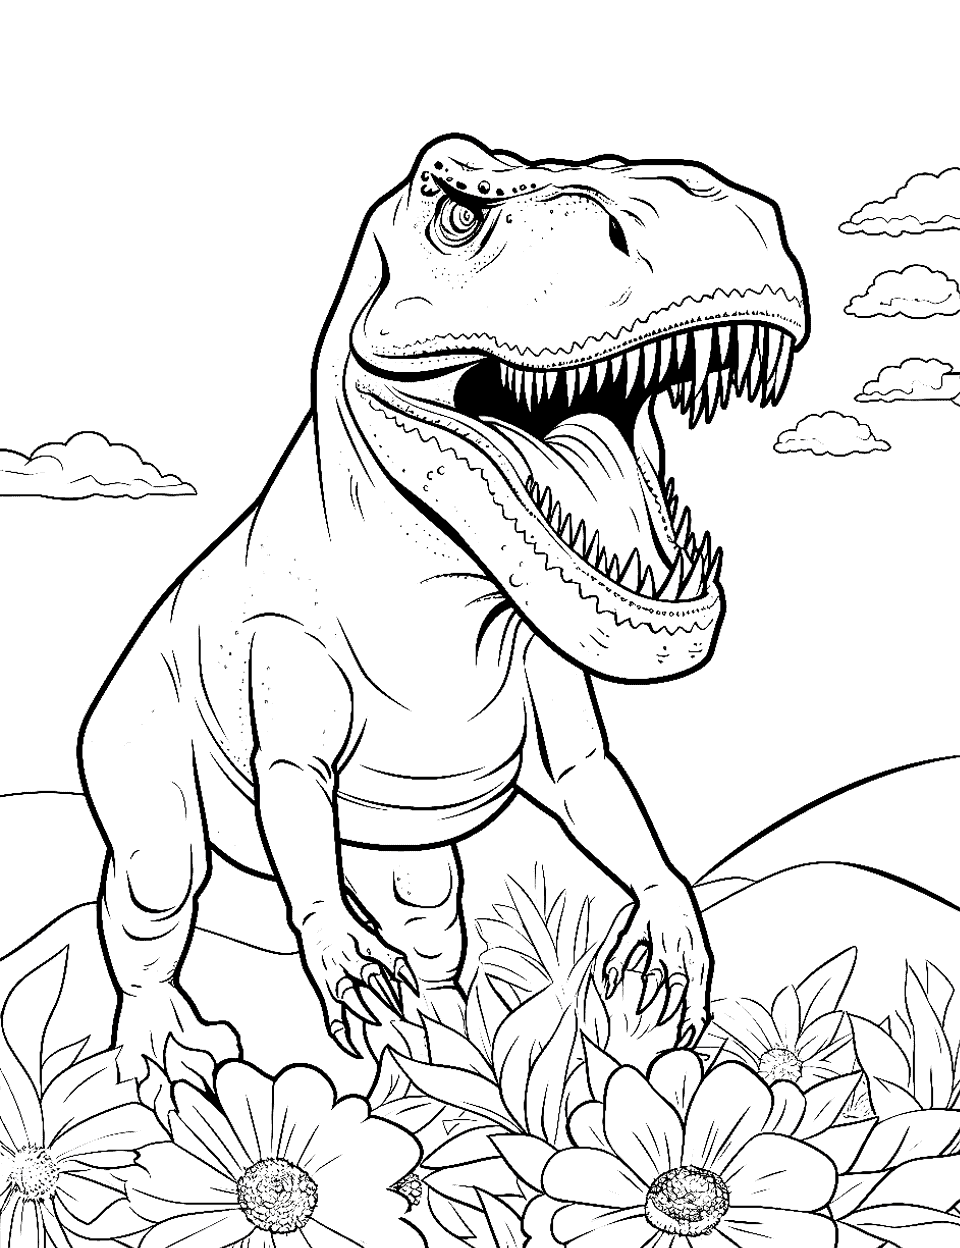 T Rex and Sunflower T-rex Coloring Page - A T-Rex in a snowflower field enjoying the view.